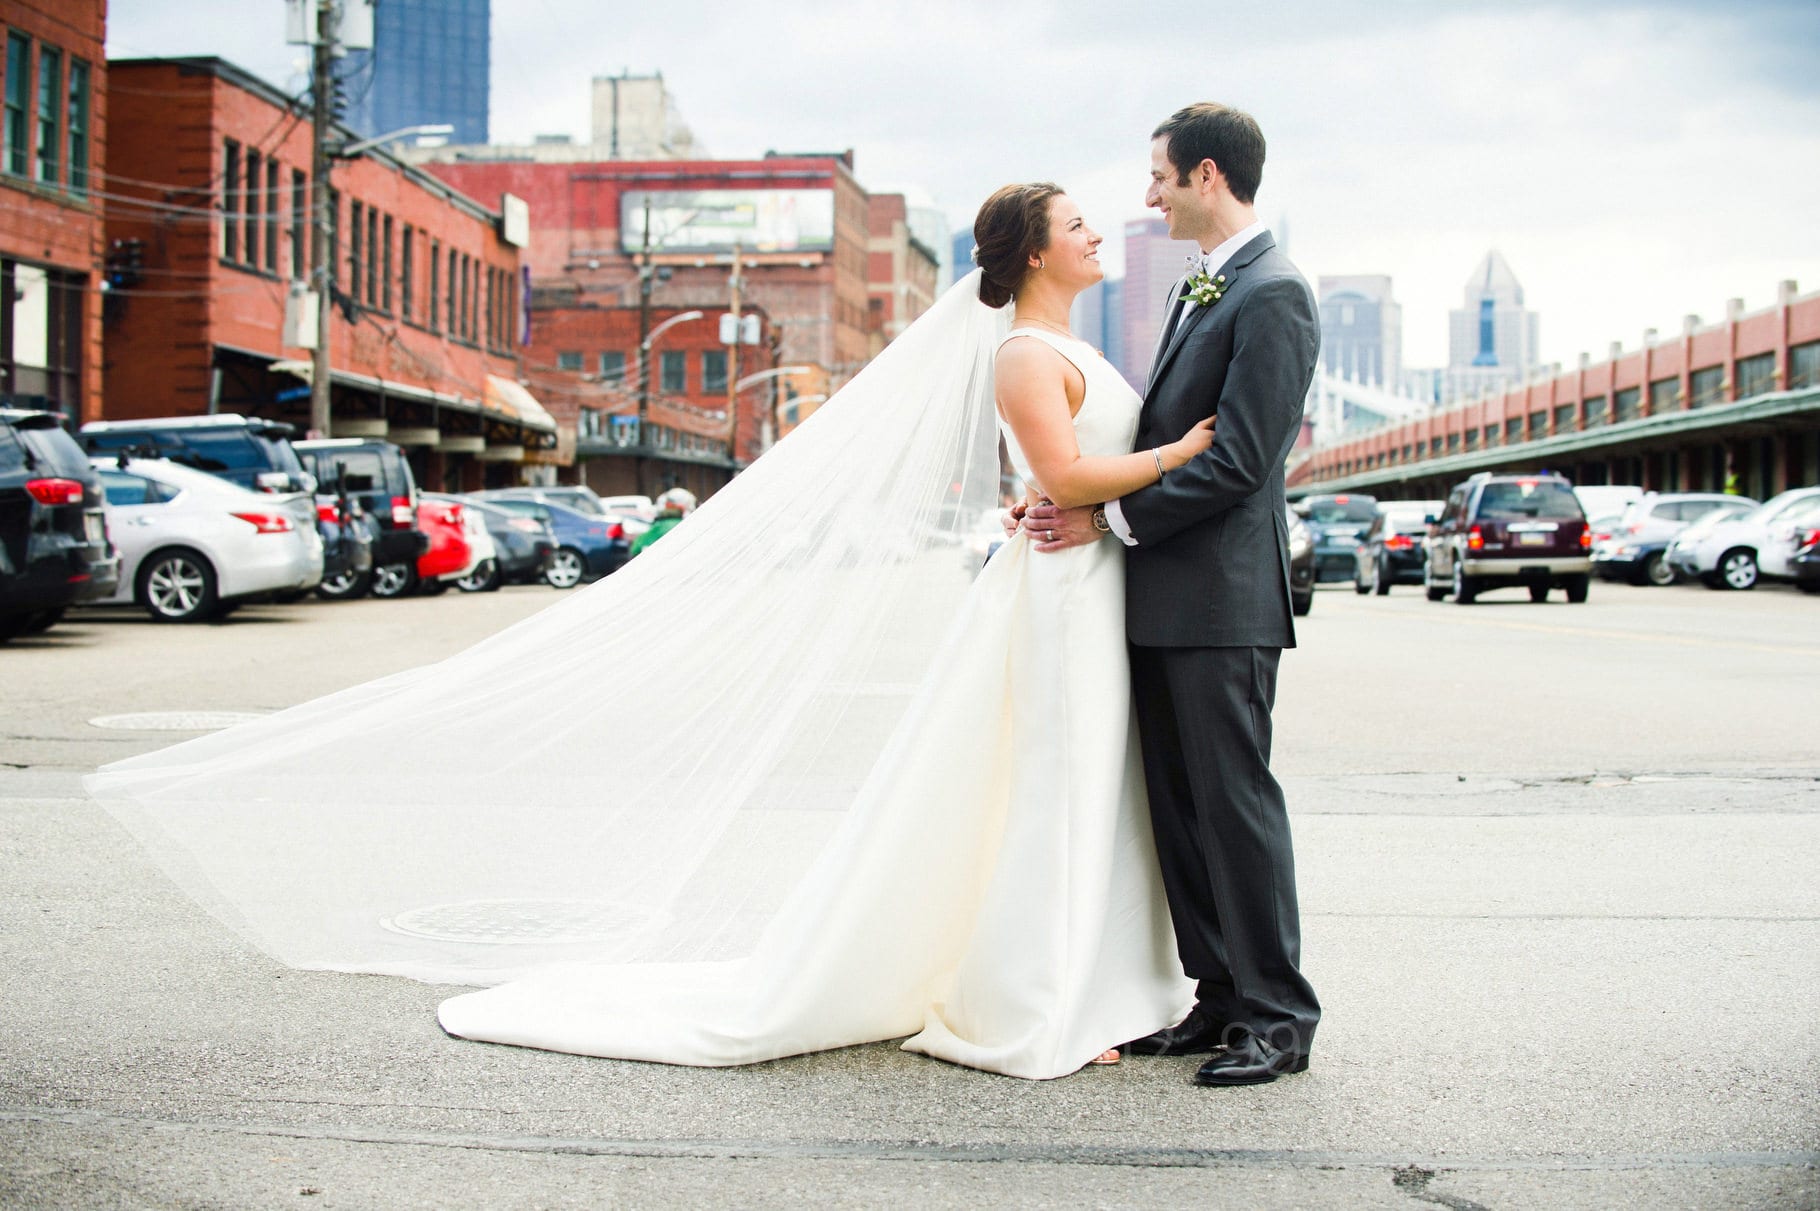 A bride's veil blows in the wind behind her as she faces her husband while they stand on Smallman Street in the Strip District in Pittsburgh near St. Stanislaus (St. Stan's).